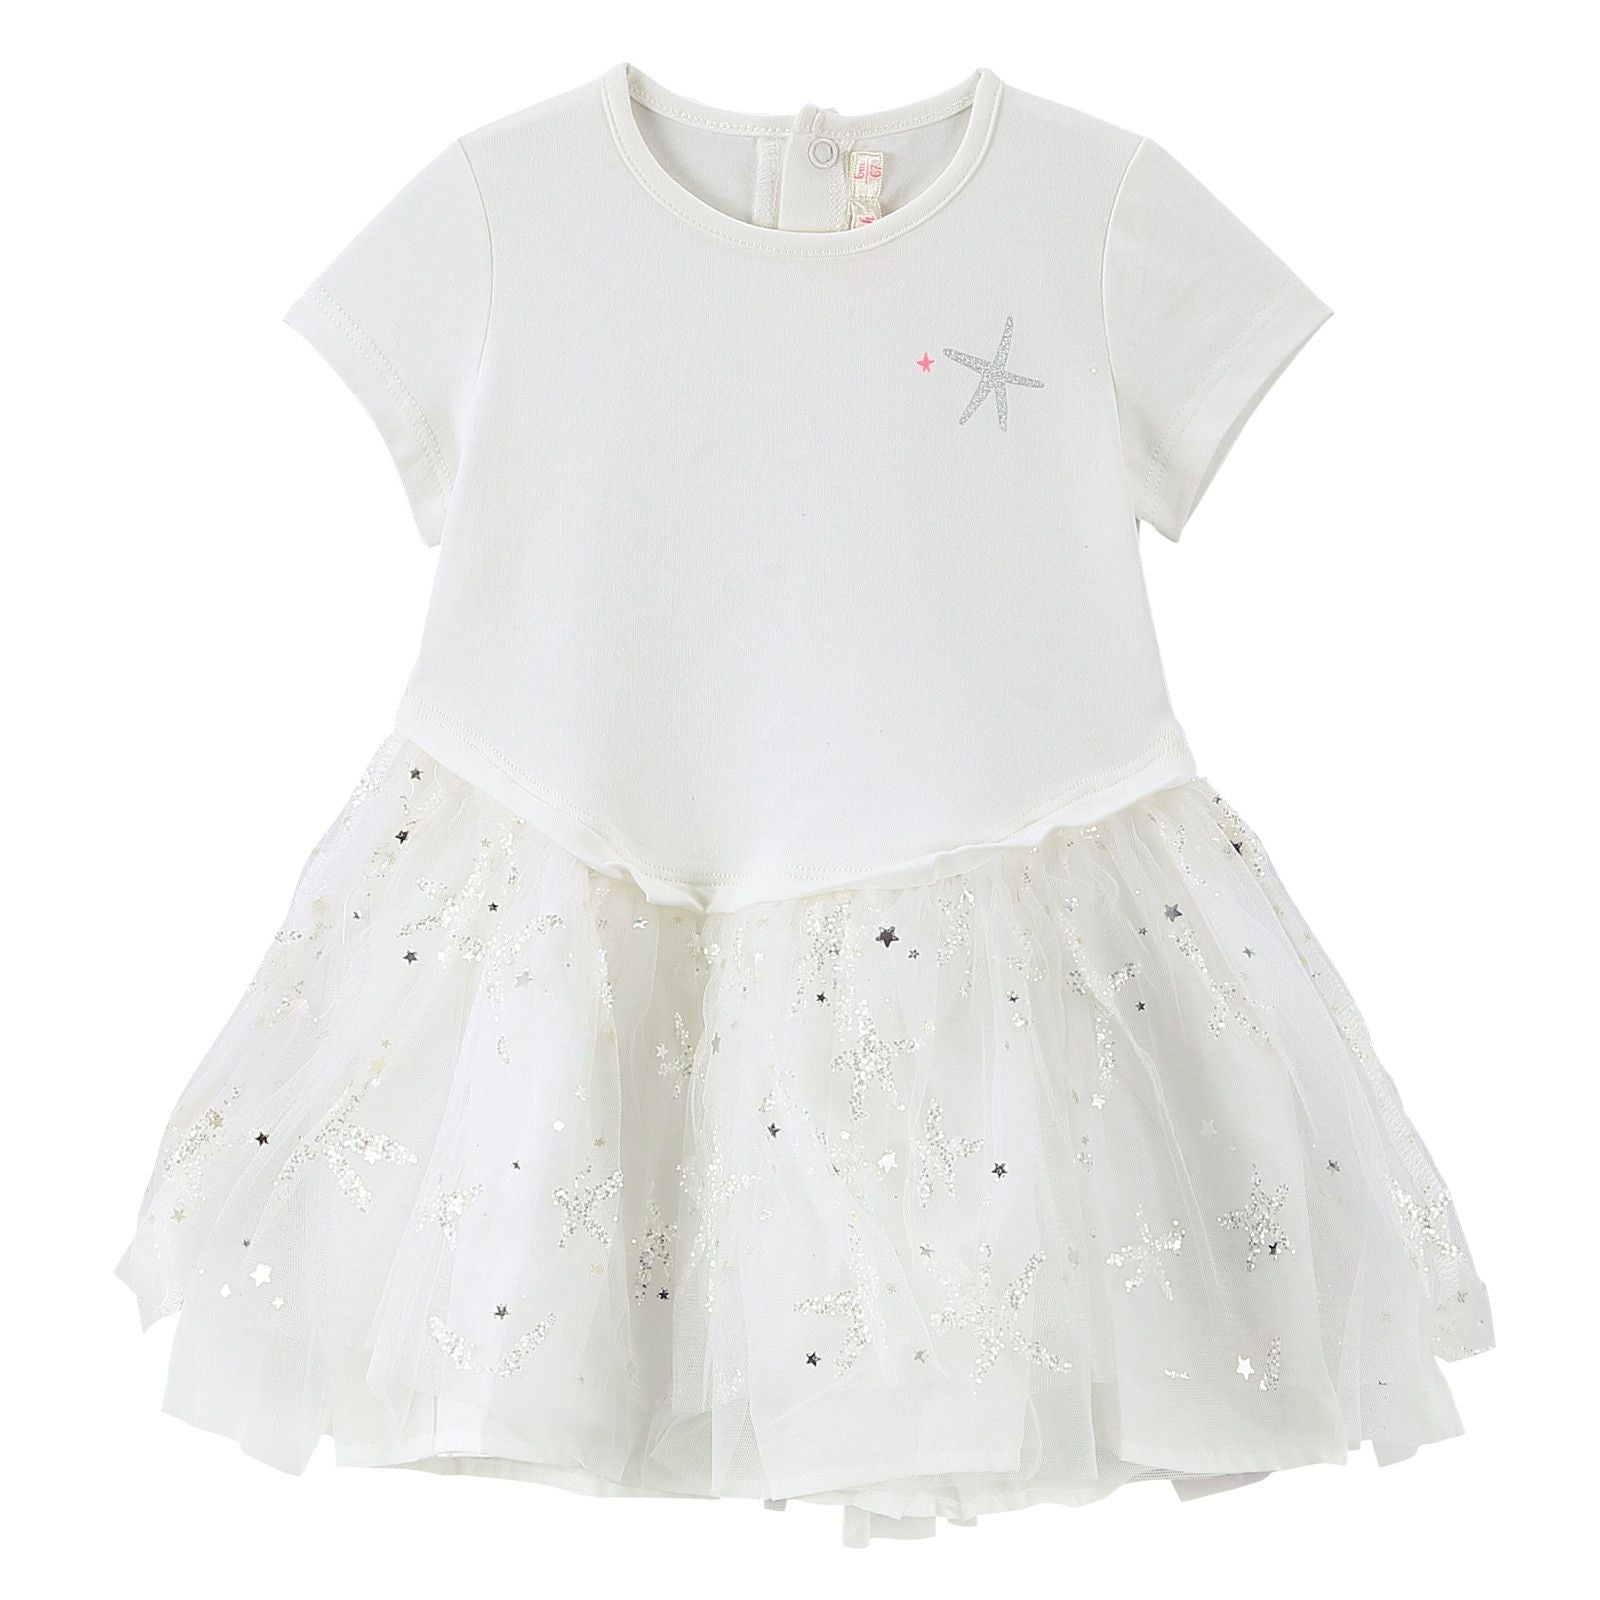 Baby Girls White Dress With Silver Patch Trims - CÉMAROSE | Children's Fashion Store - 1